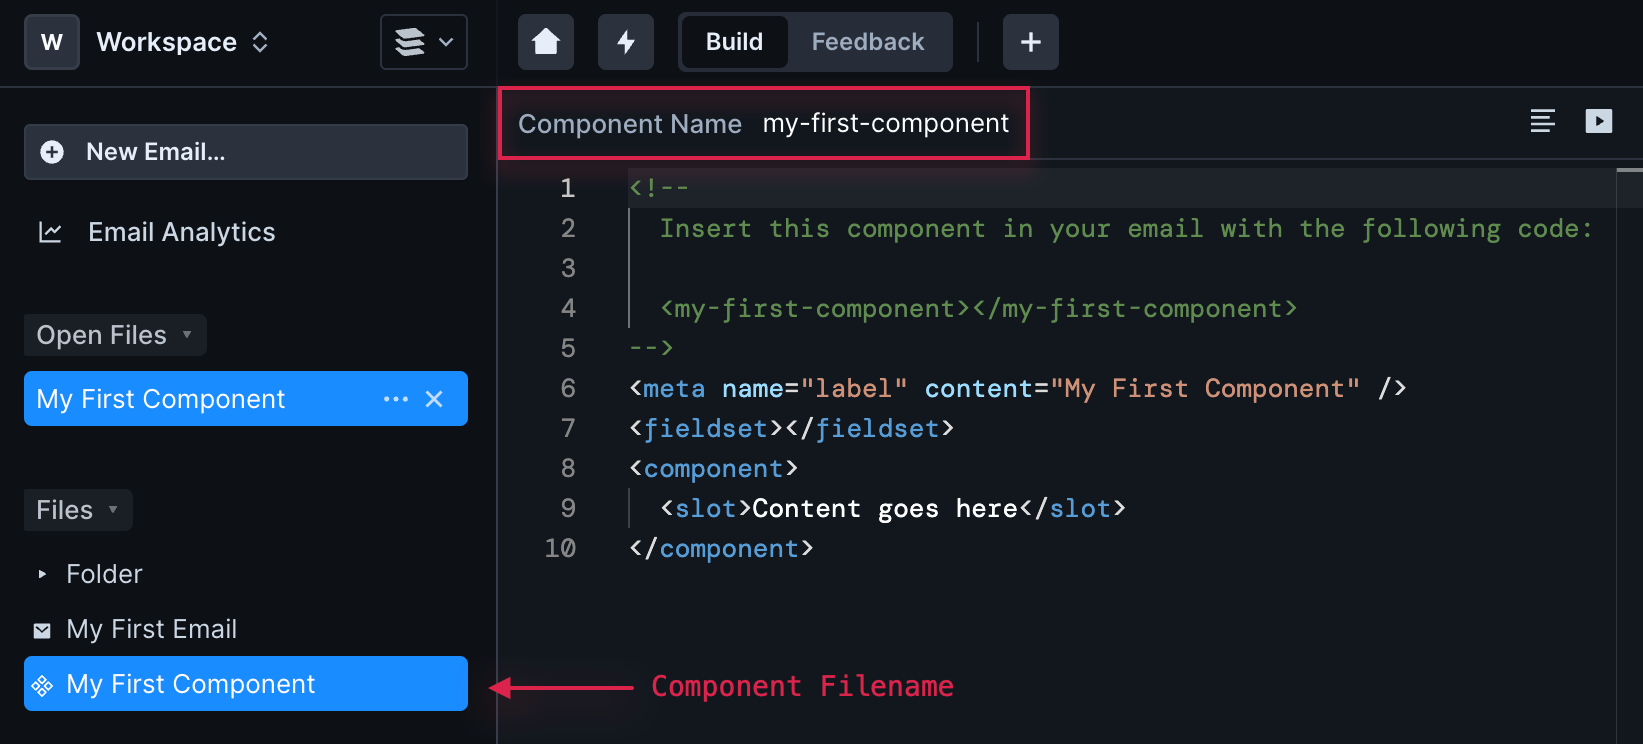 Screenshot showing the component filename and component name